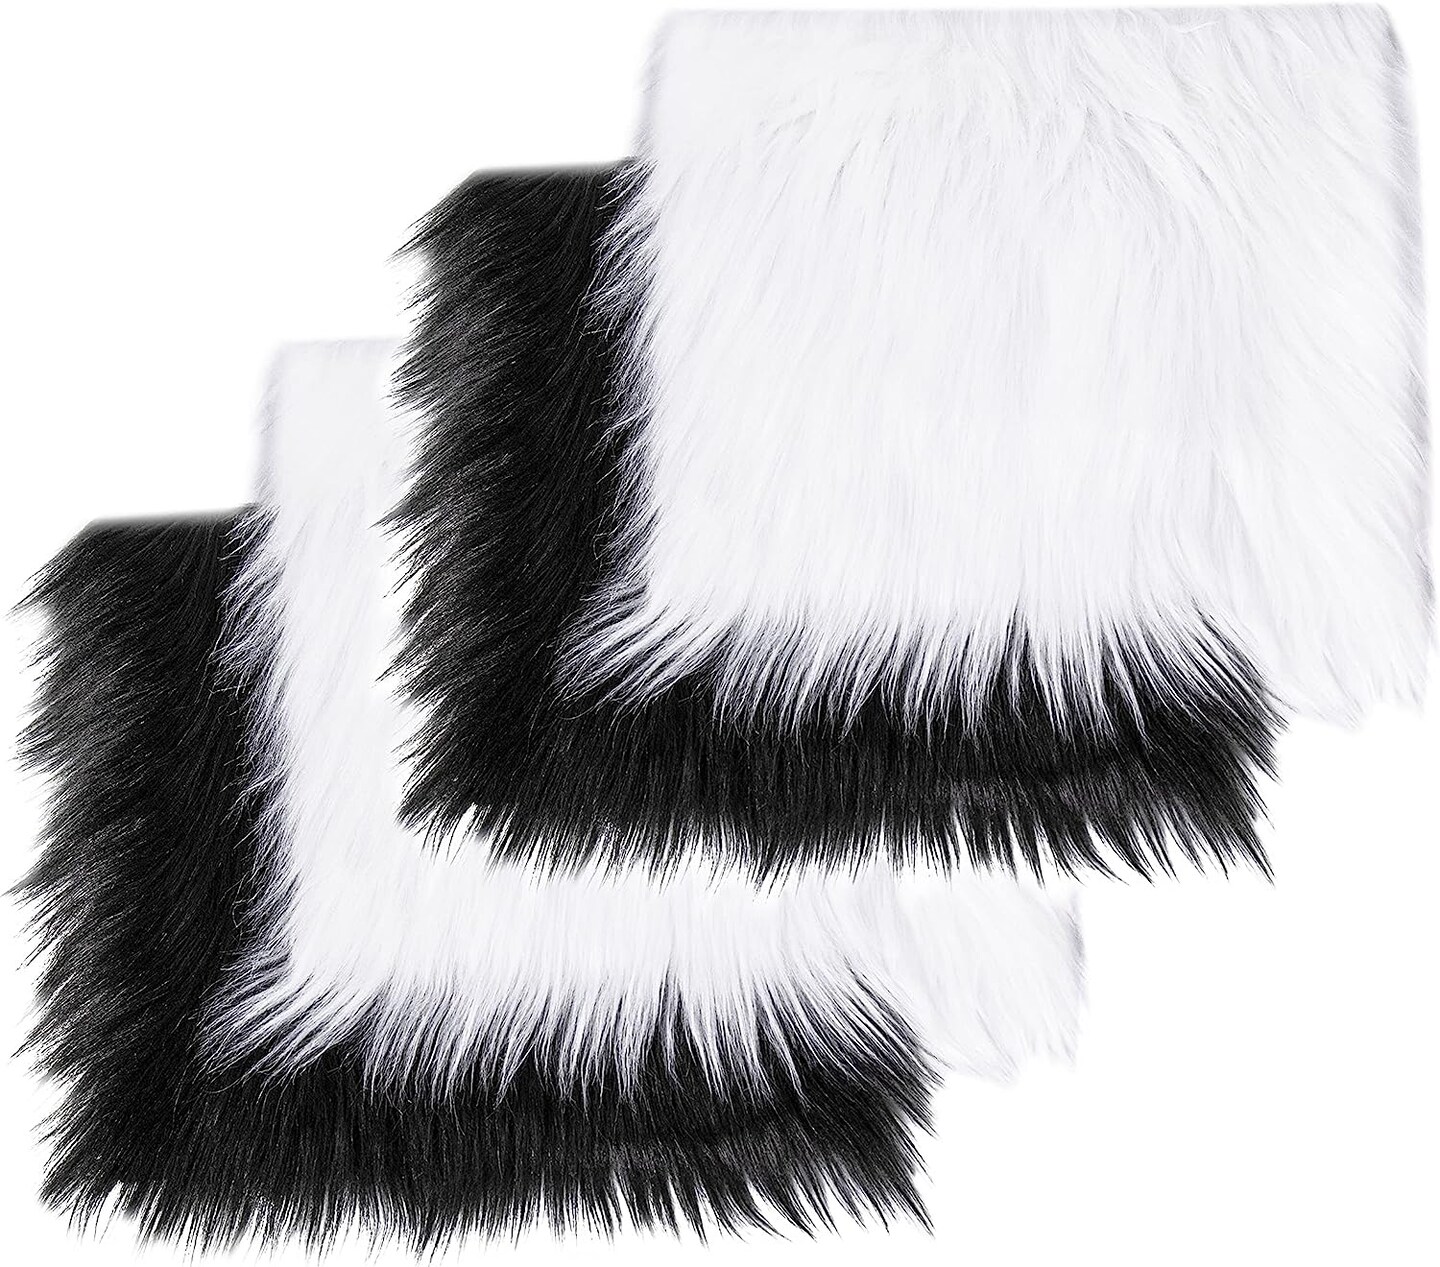 FabricLA Shaggy Faux Fur Fabric - 8 X 8 Inches Pre-Cut - Use Fake Fur for  DIY Craft, Fashion Accessory, Home Decoration, Hobby - 2 White & 2 Black  Pack